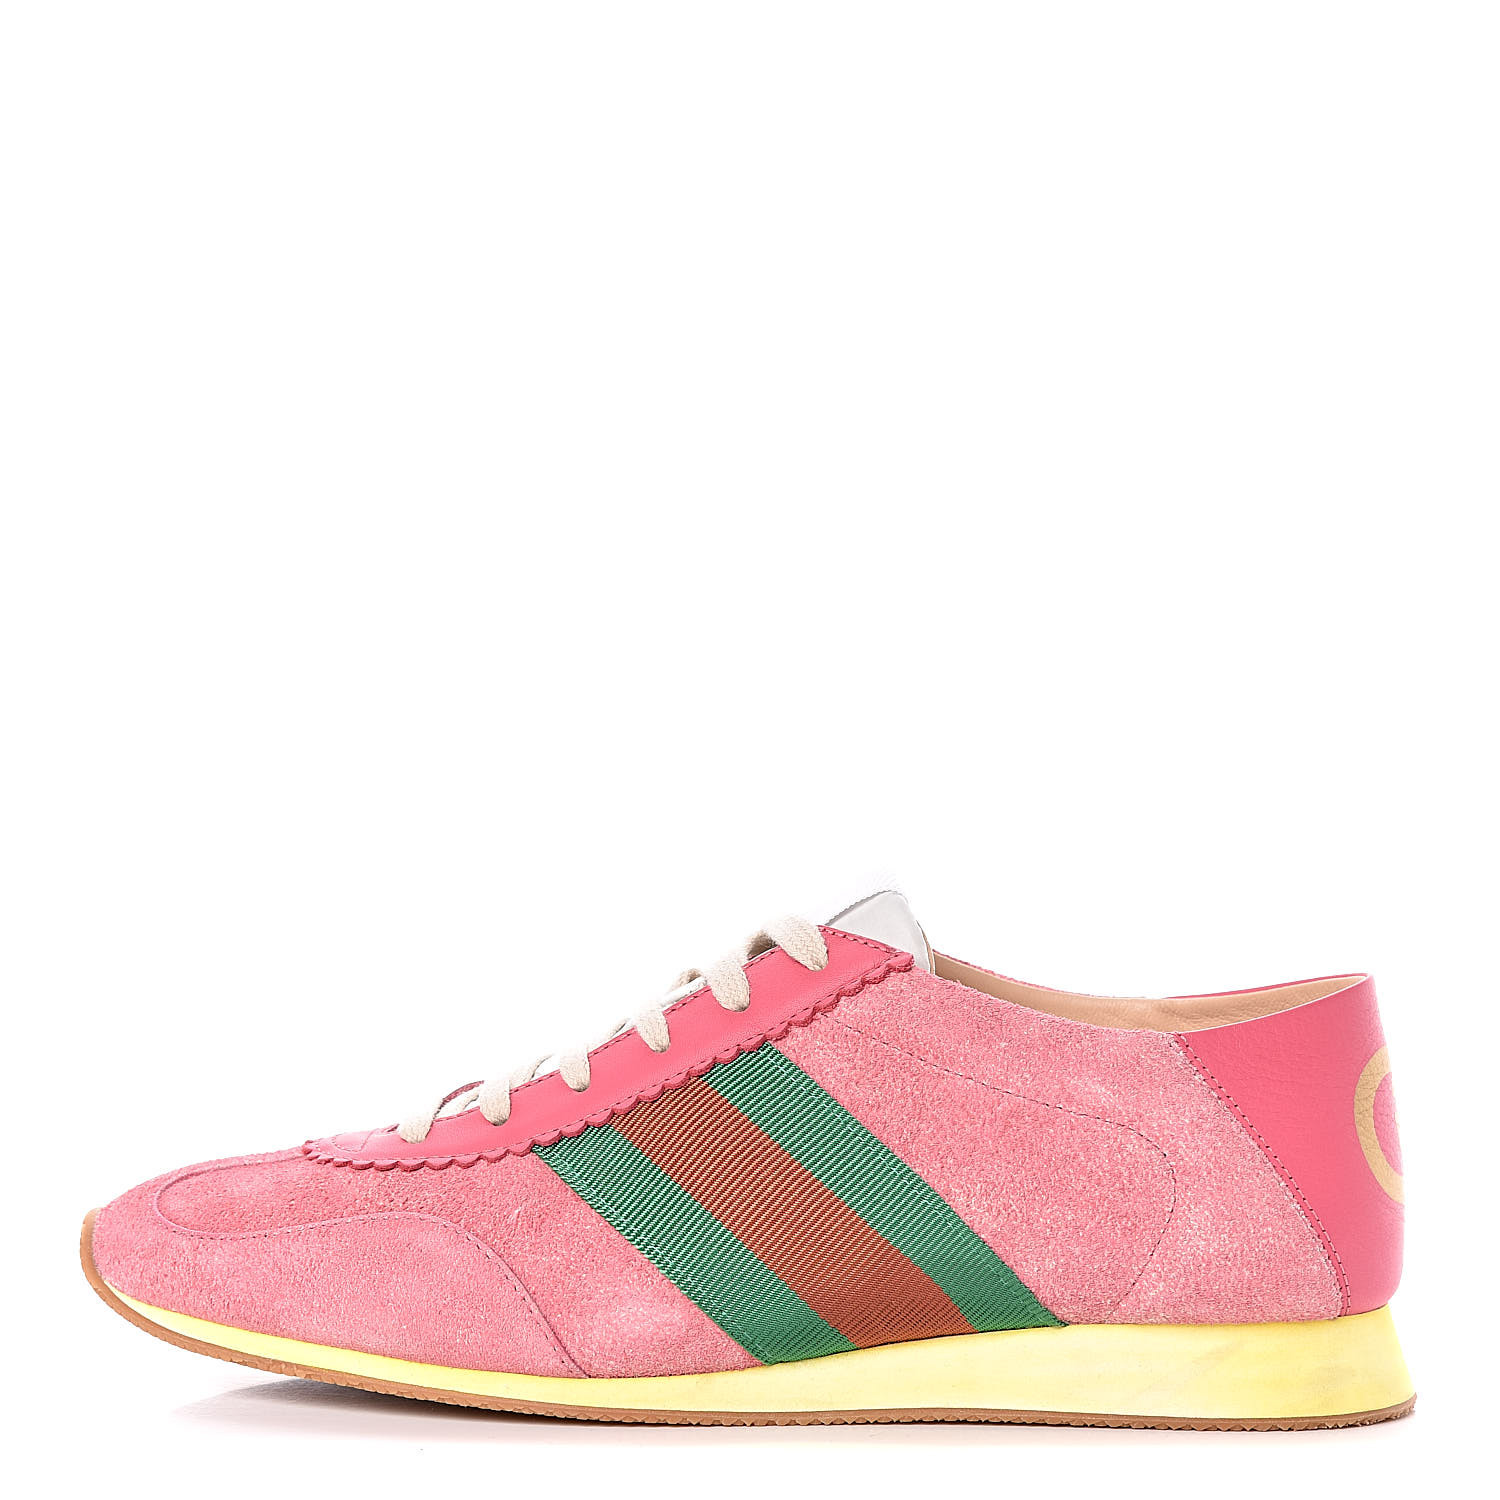 gucci tennis shoes pink, OFF 79%,www 